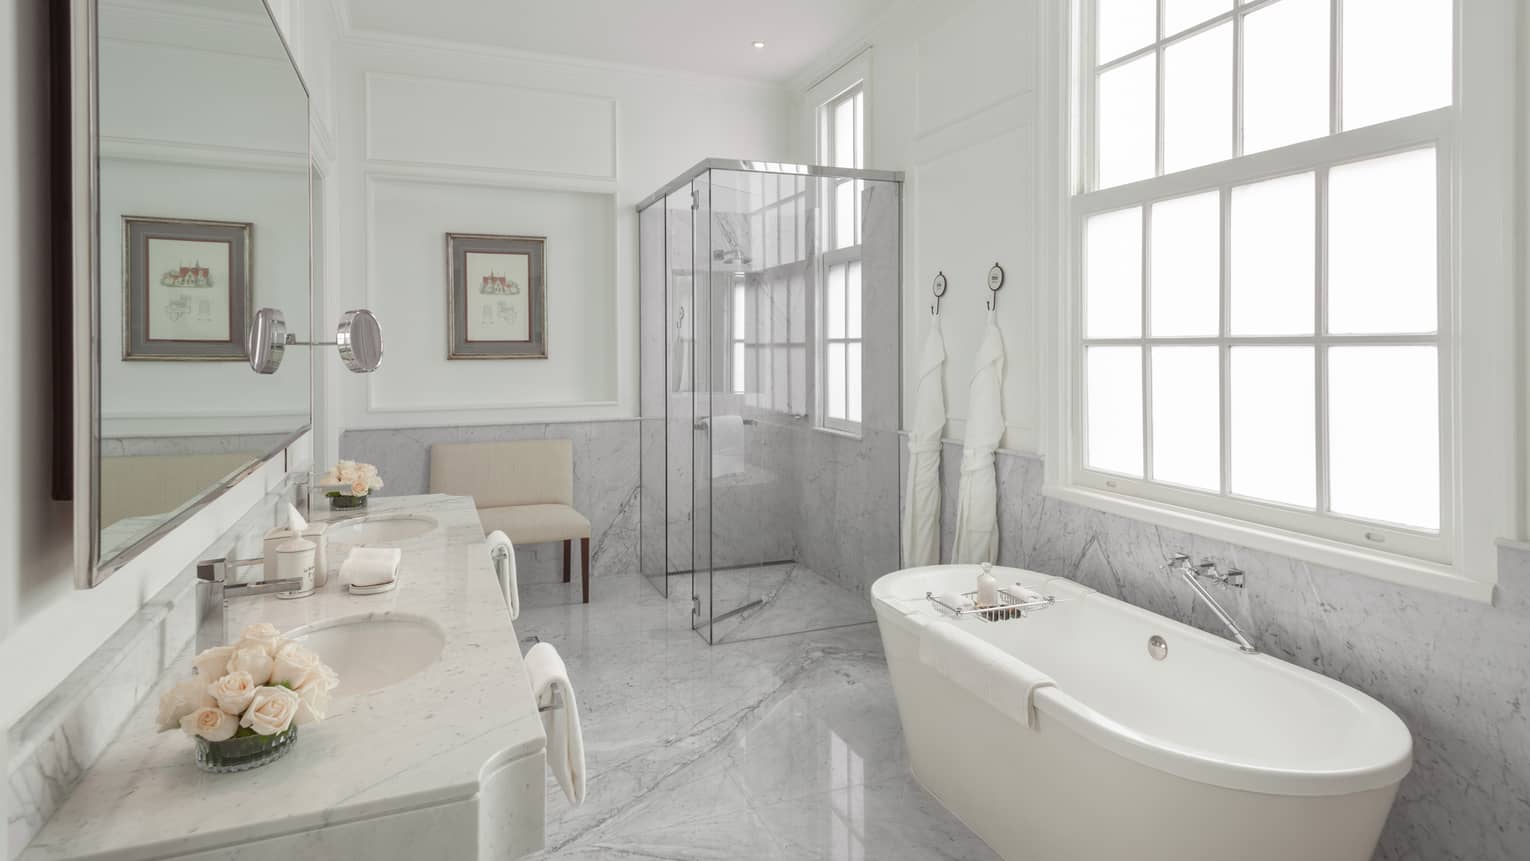 The La Mansion Bathroom is filled with a porcelain bath tub, glass shower and long mirror